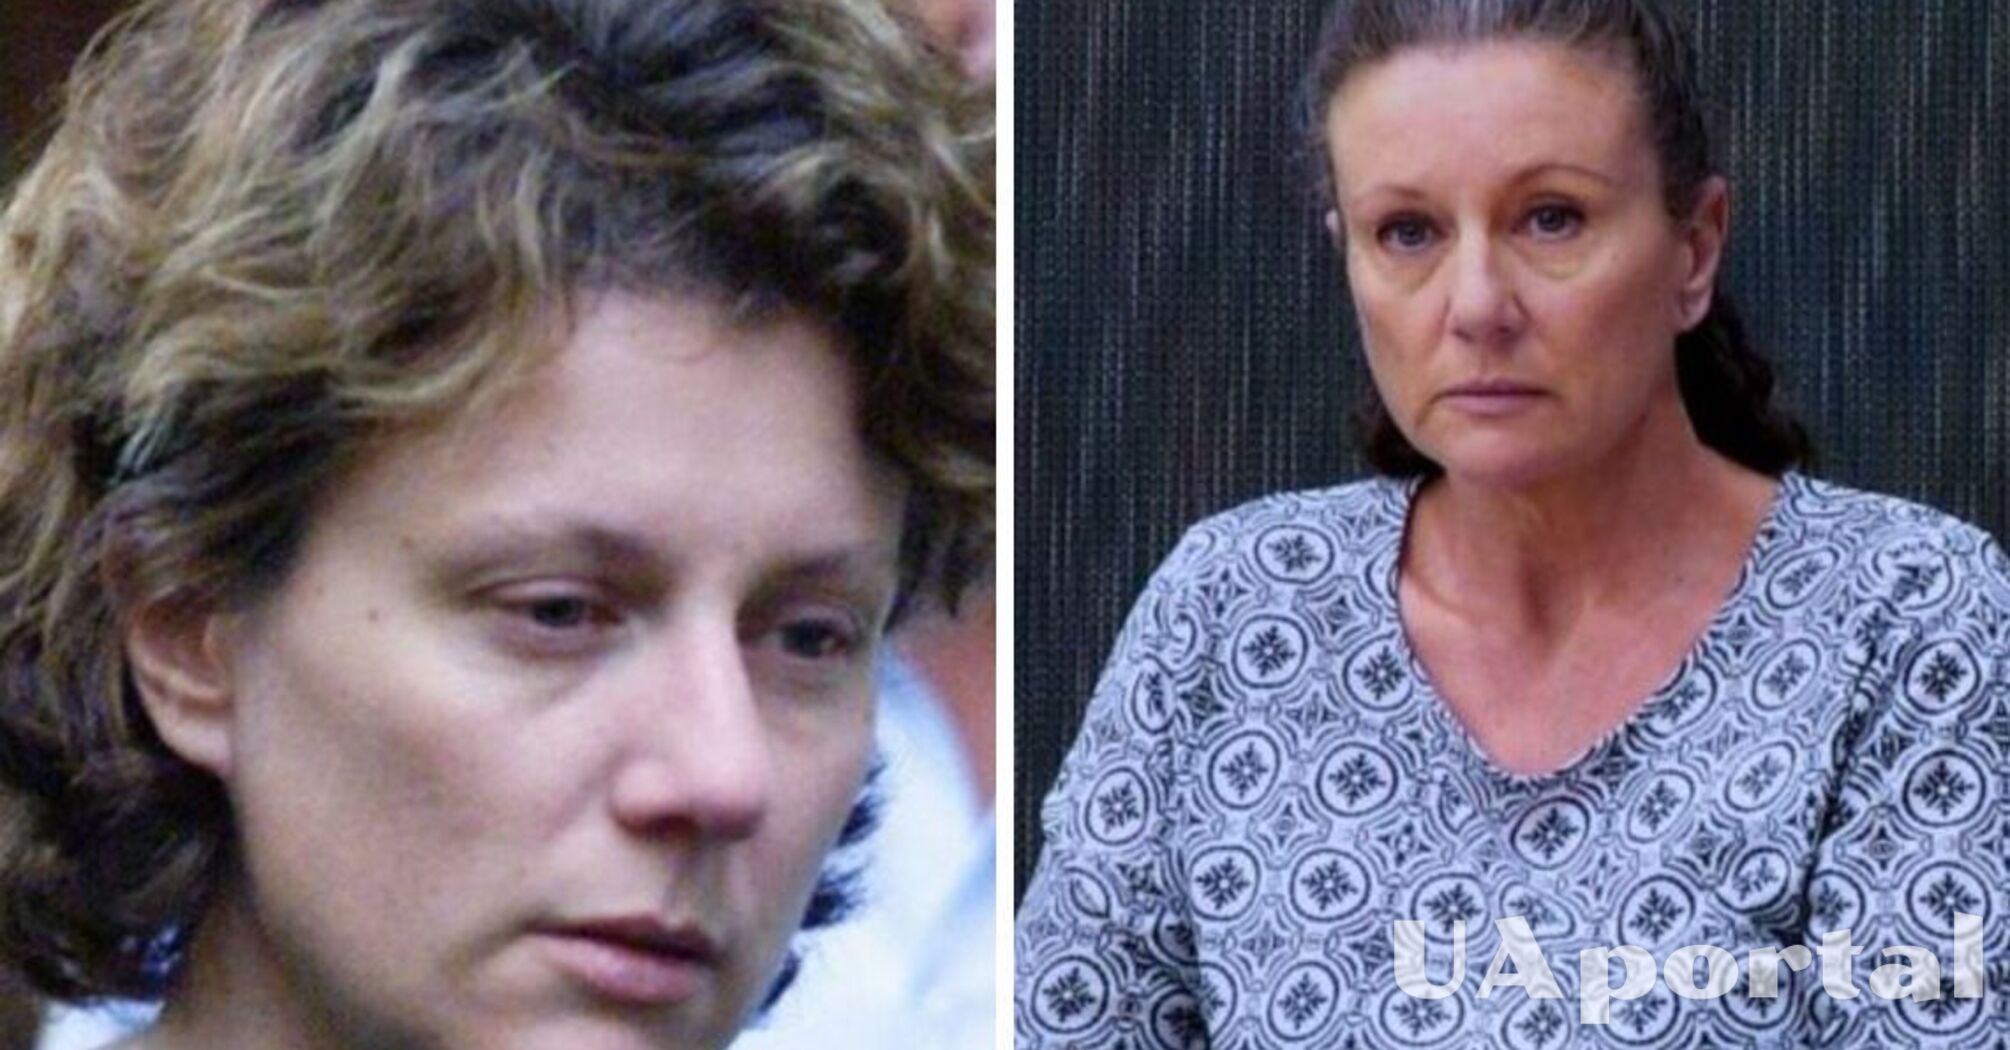 Mother served 20 years for 'strangling' her 4 children: science helped prove her innocence